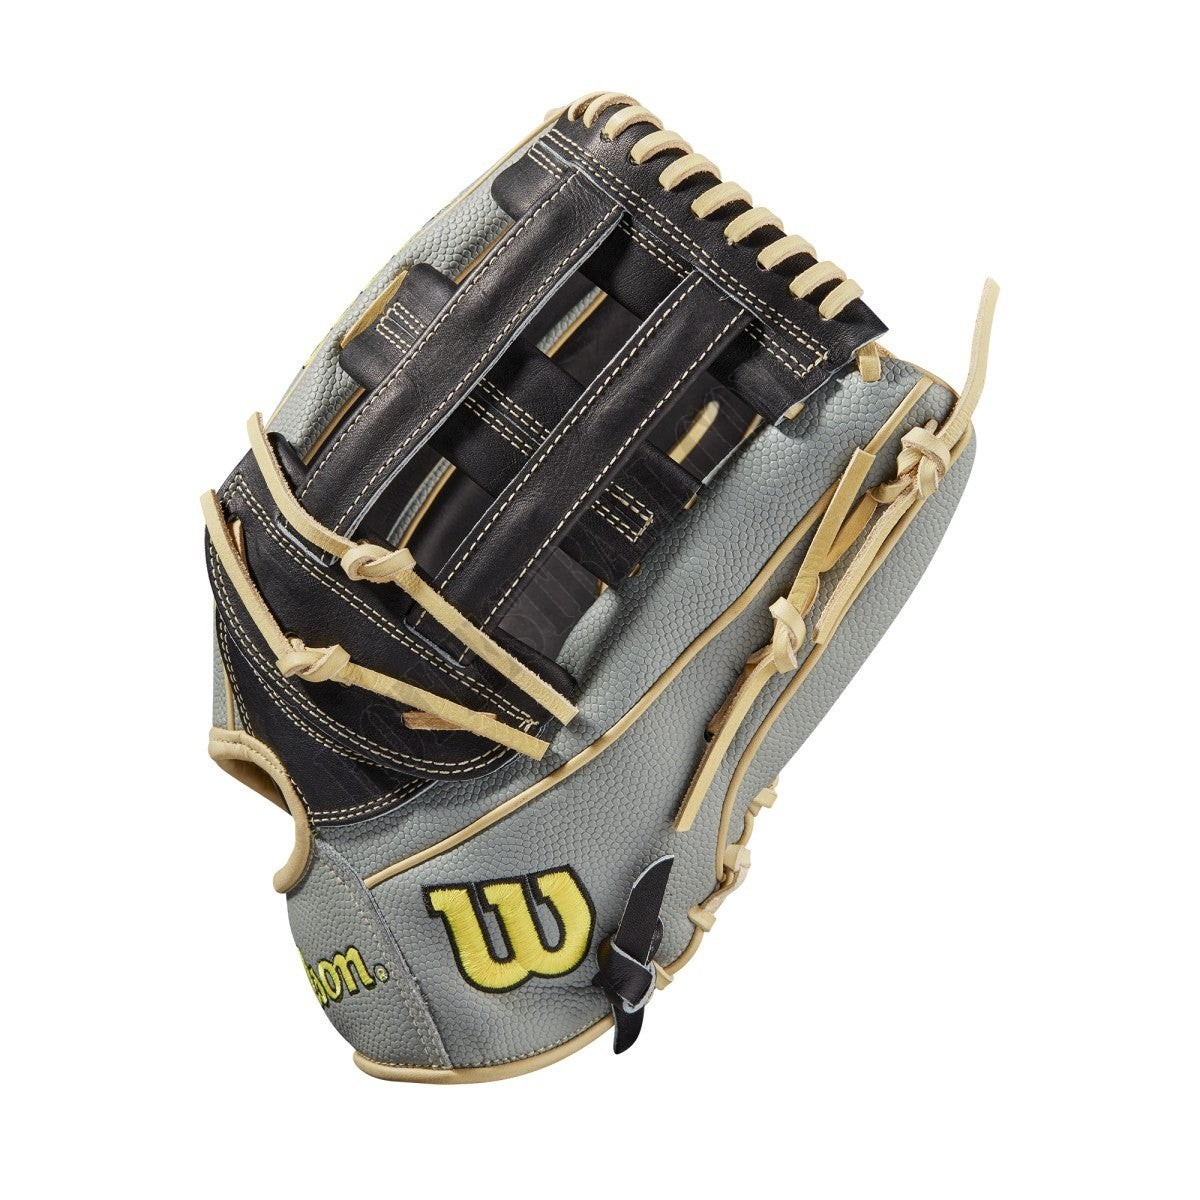 2021 A2000 1799SS 12.75" Outfield Baseball Glove ● Wilson Promotions - -3